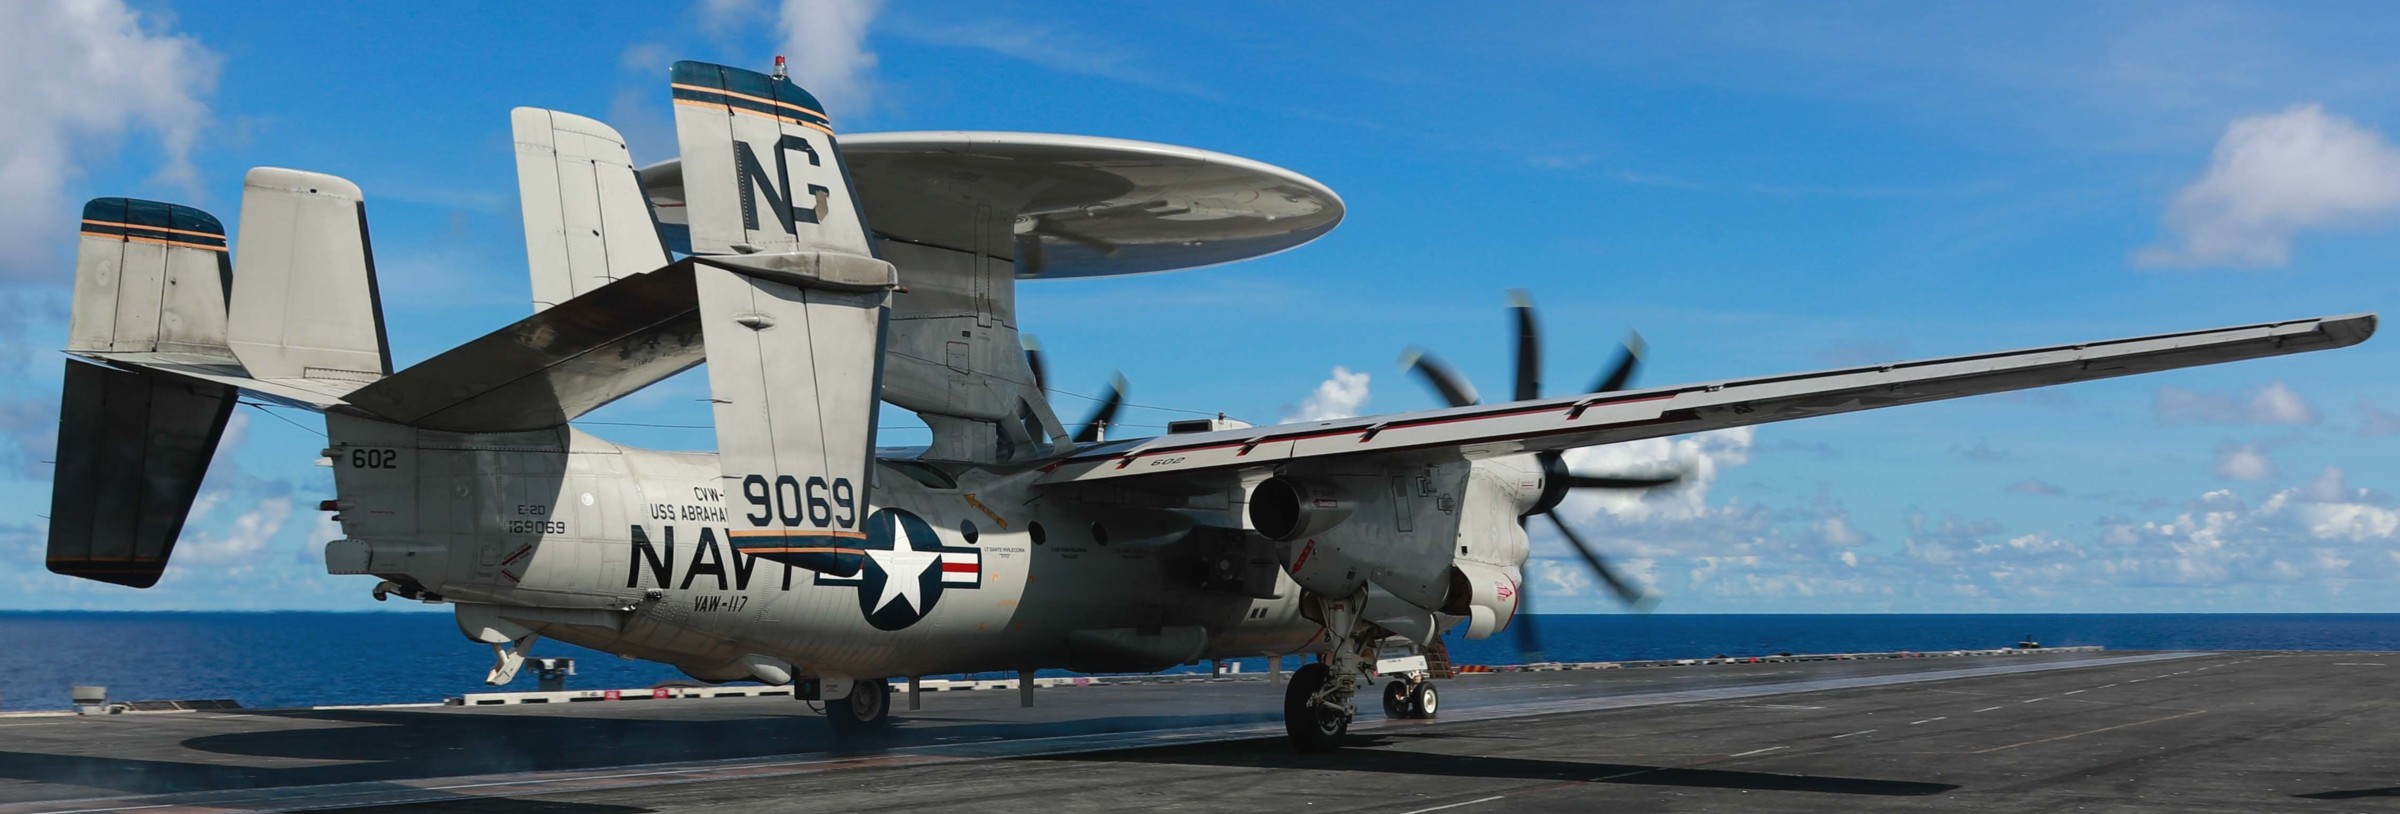 vaw-117 wallbangers airborne command and control squadron navy e-2d advanced hawkeye cvw-9 uss abraham lincoln cvn-72 07